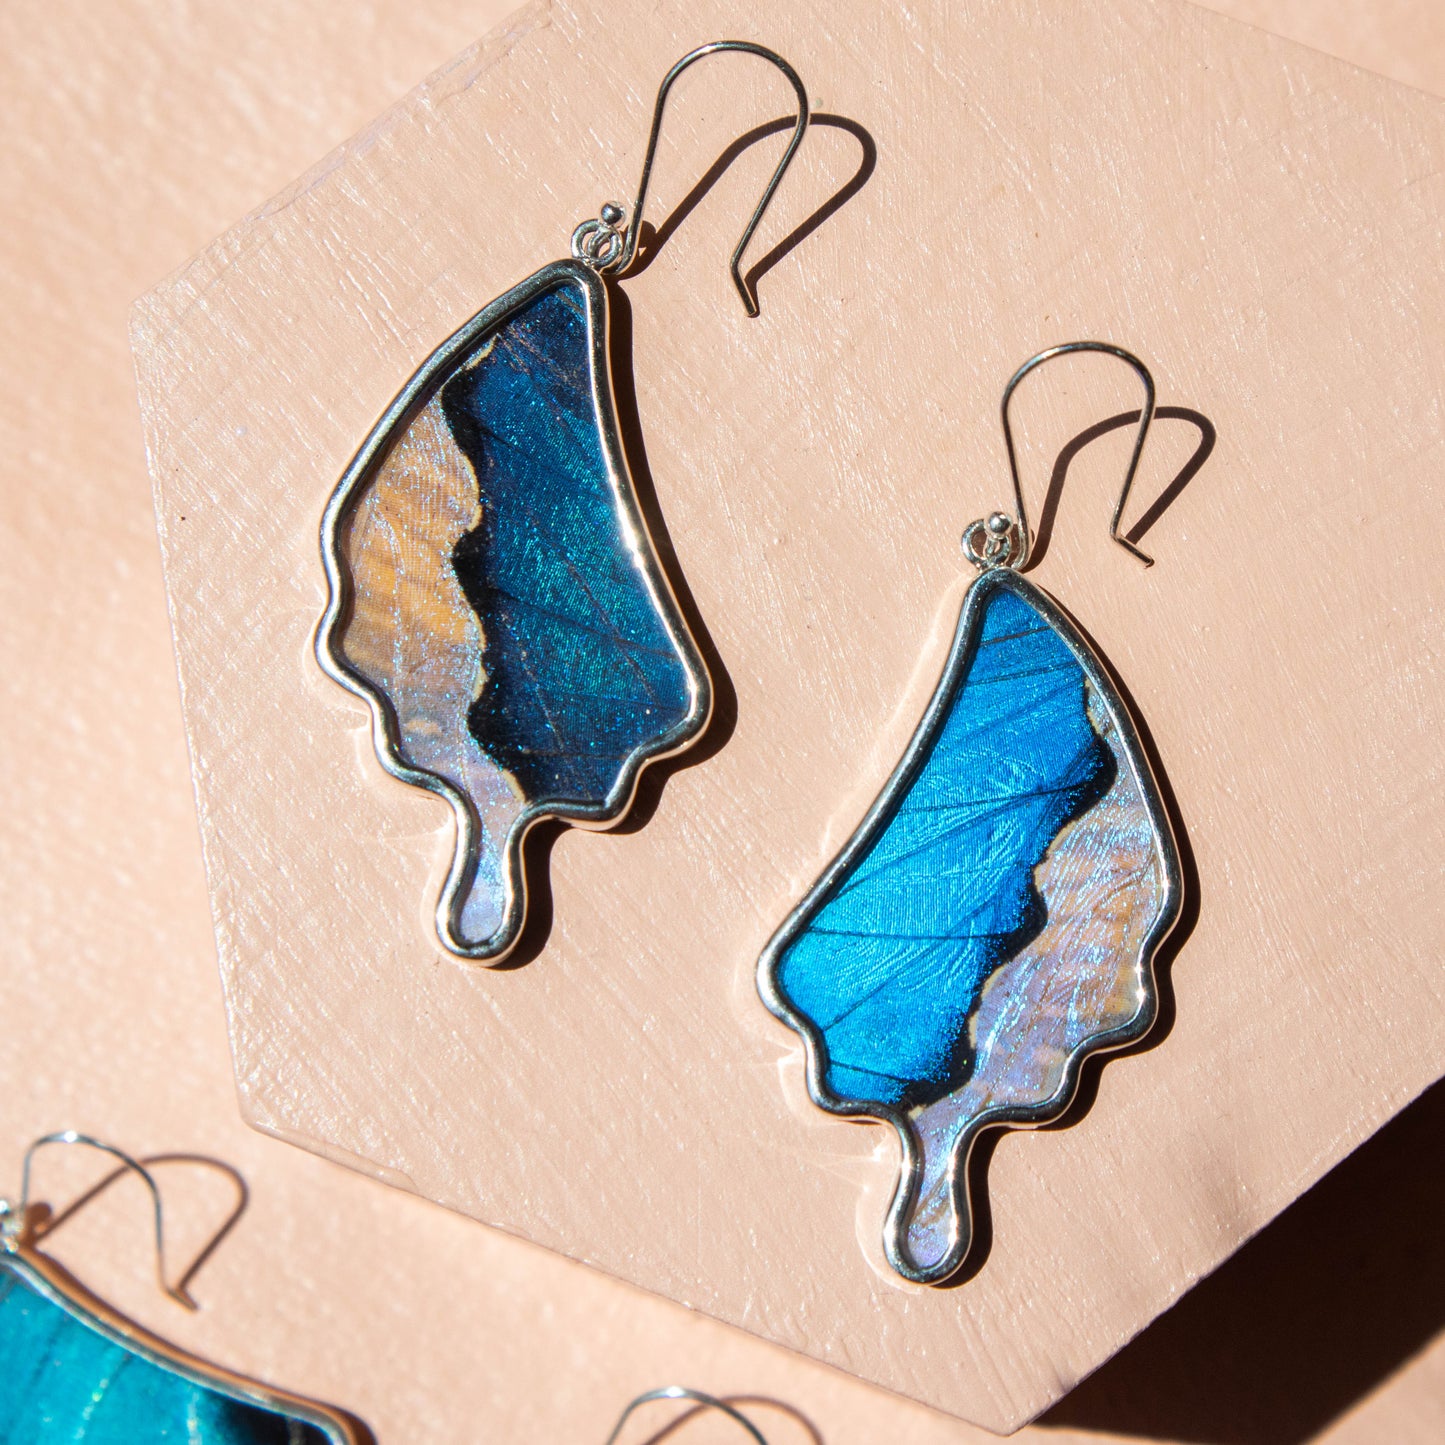 preserved butterfly earrings, preserved butterflies, butterflies, butterfly wings, morpho achilles, morpho achilles butterfly, morpho achilles species, butterfly jewelry, butterfly earrings, morpho sulkowski, morpho sulkowski species